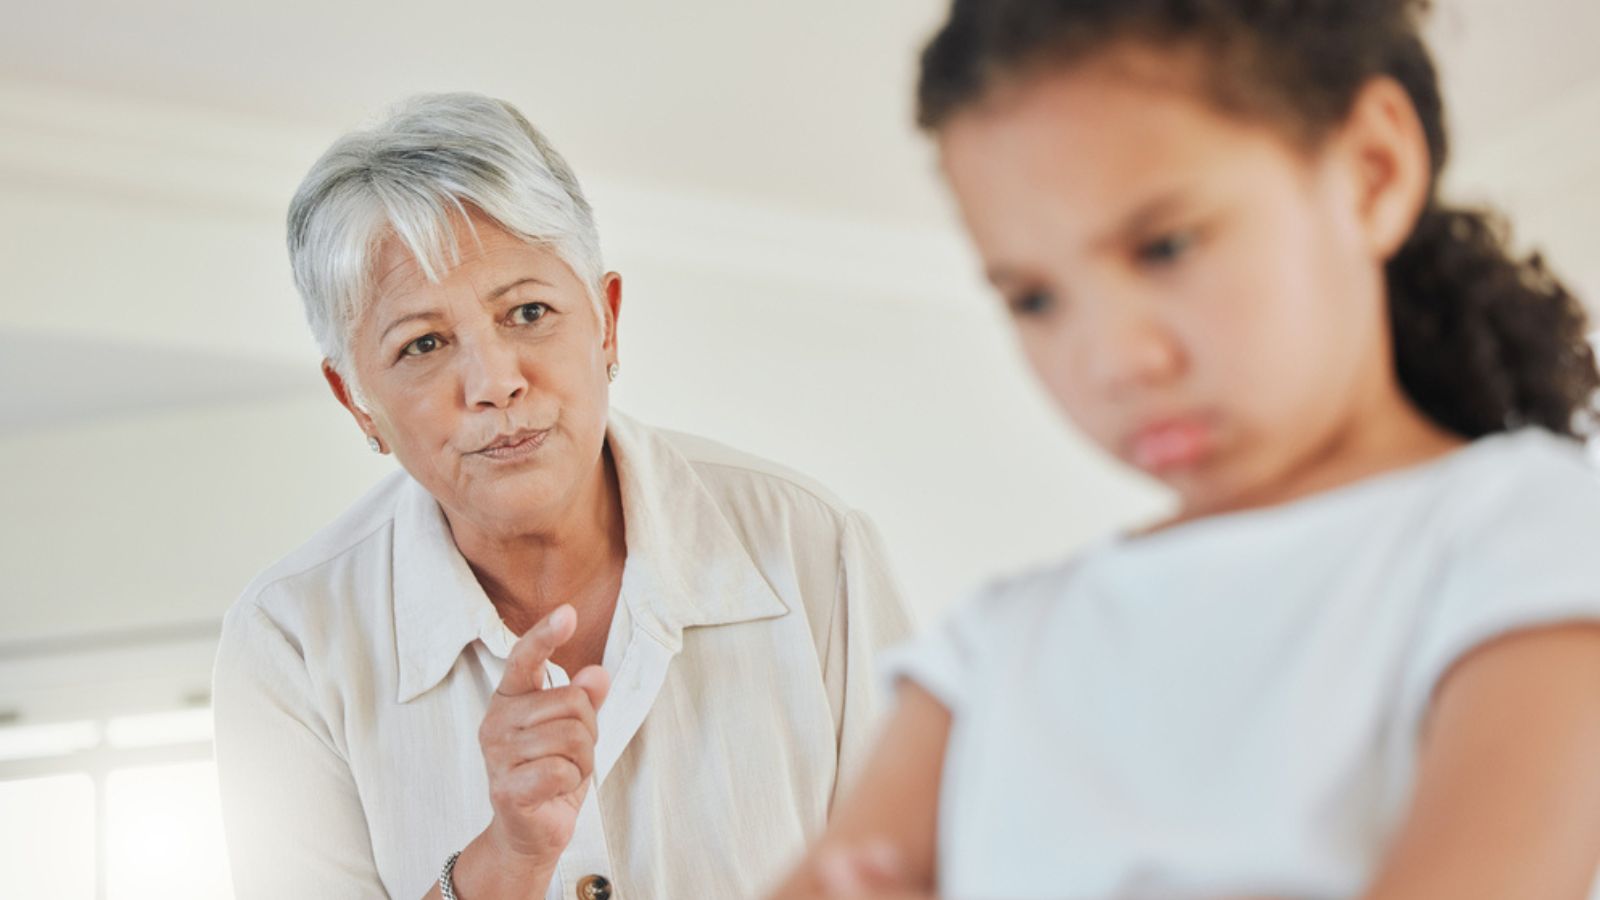 grandmother looking annoyed with her granddaughter at home